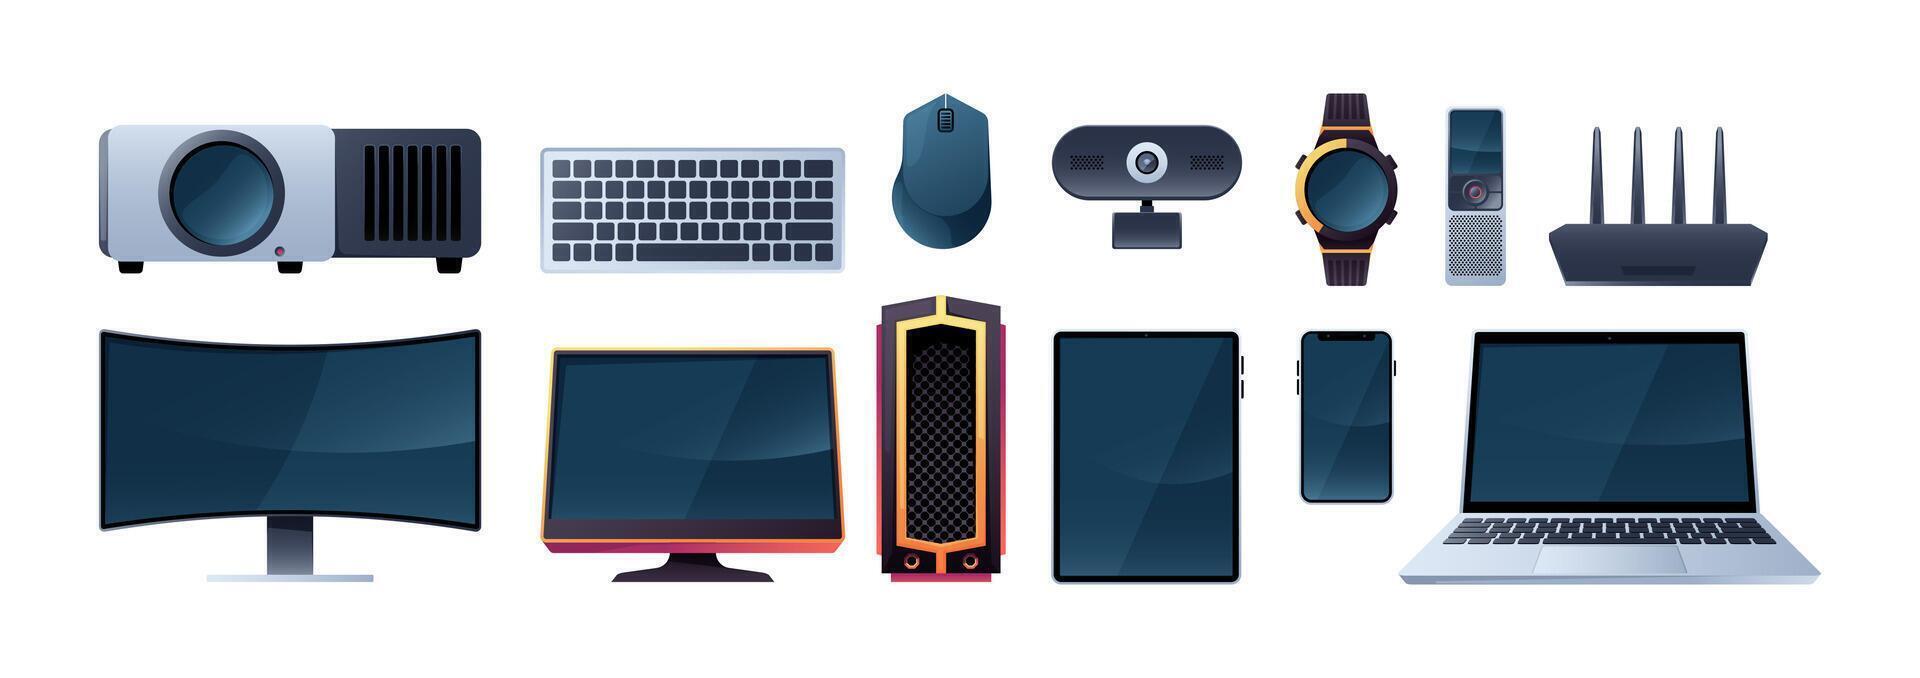 Technology gadgets set. Portable wireless appliances, cartoon bundle of electronic devices and computer appliance flat style. Vector isolated collection